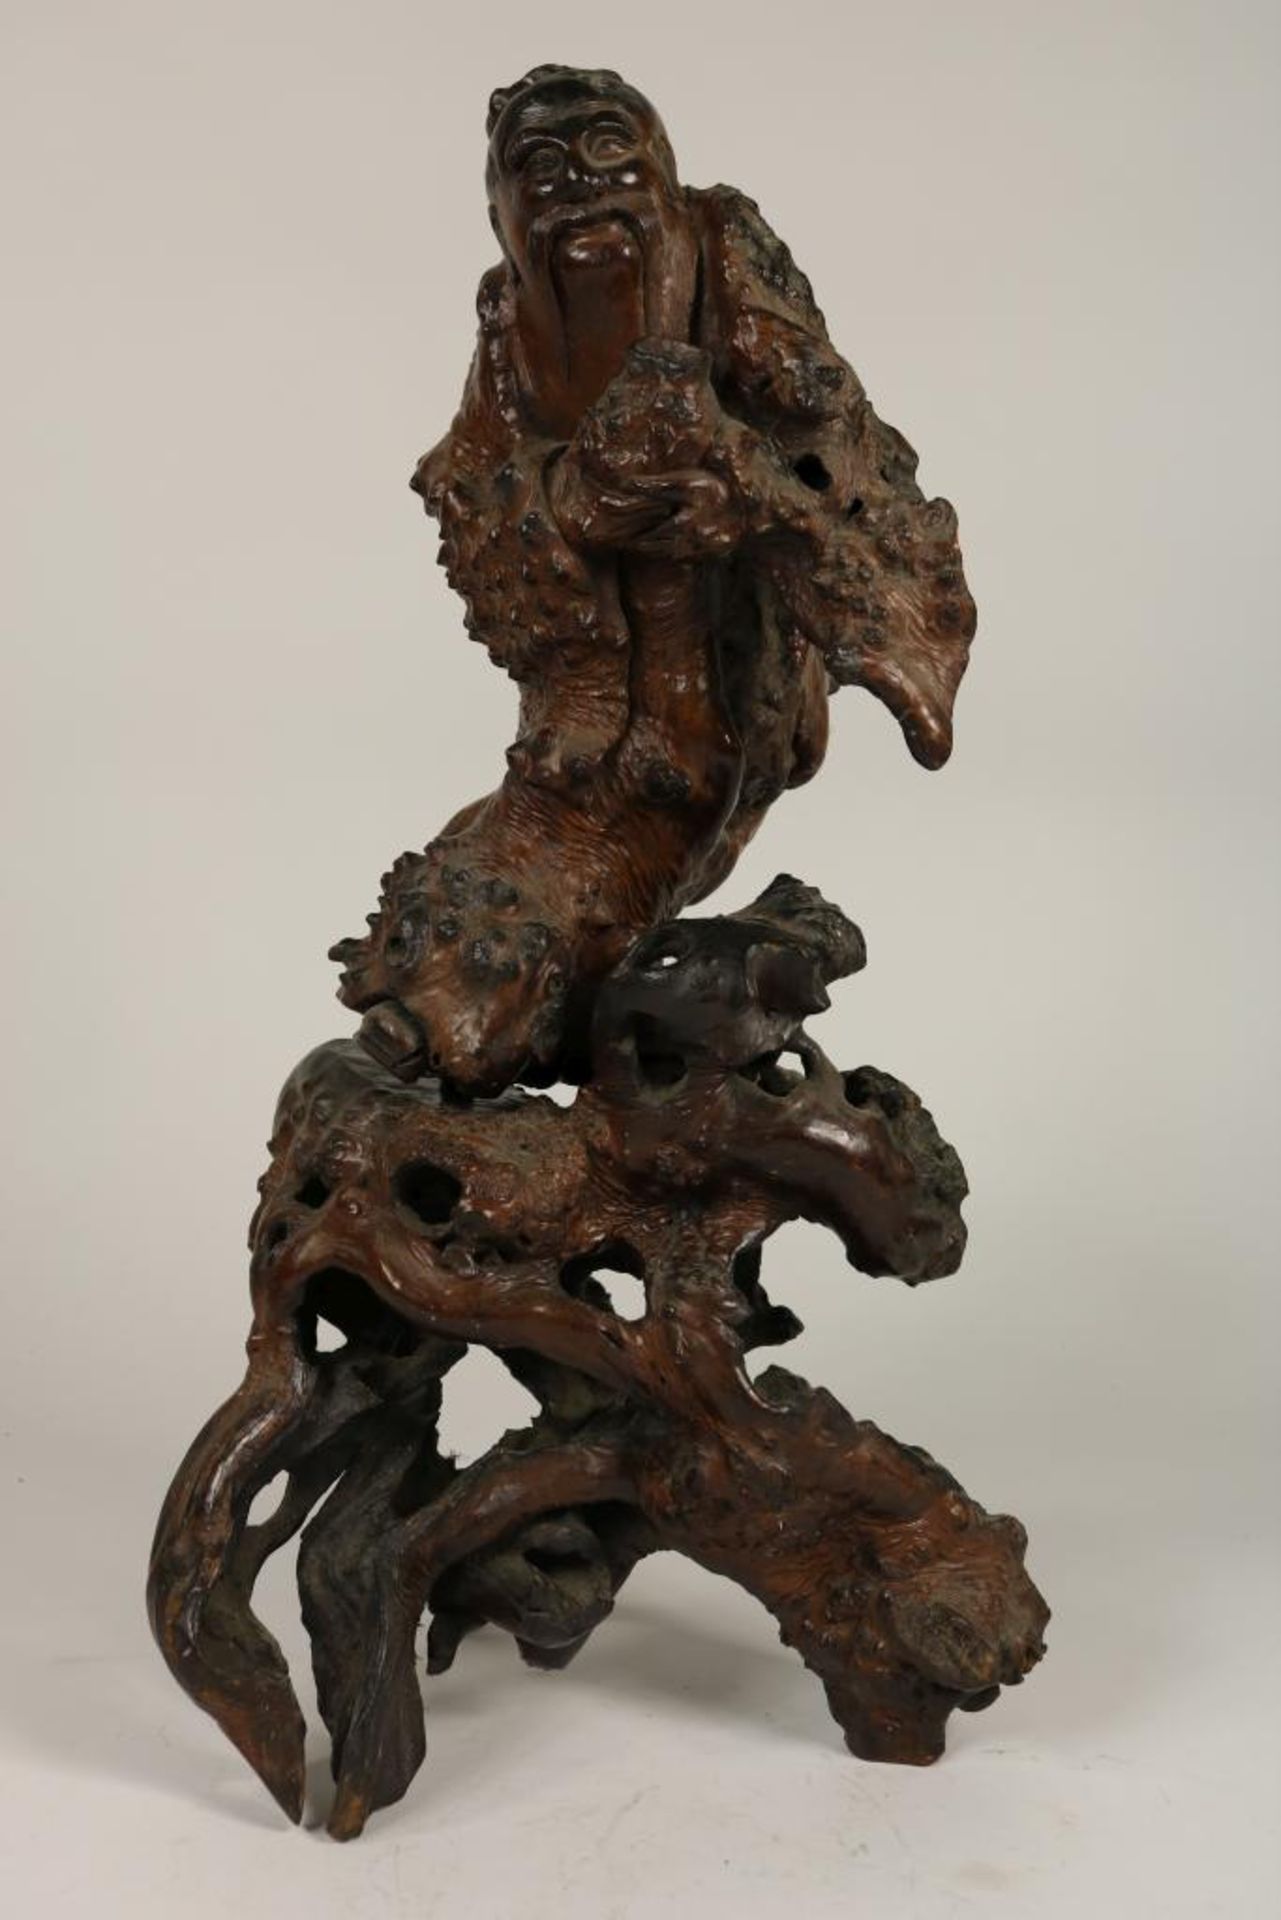 Wooden carved sculpture of Shou Lao, China, h. 50 cm.